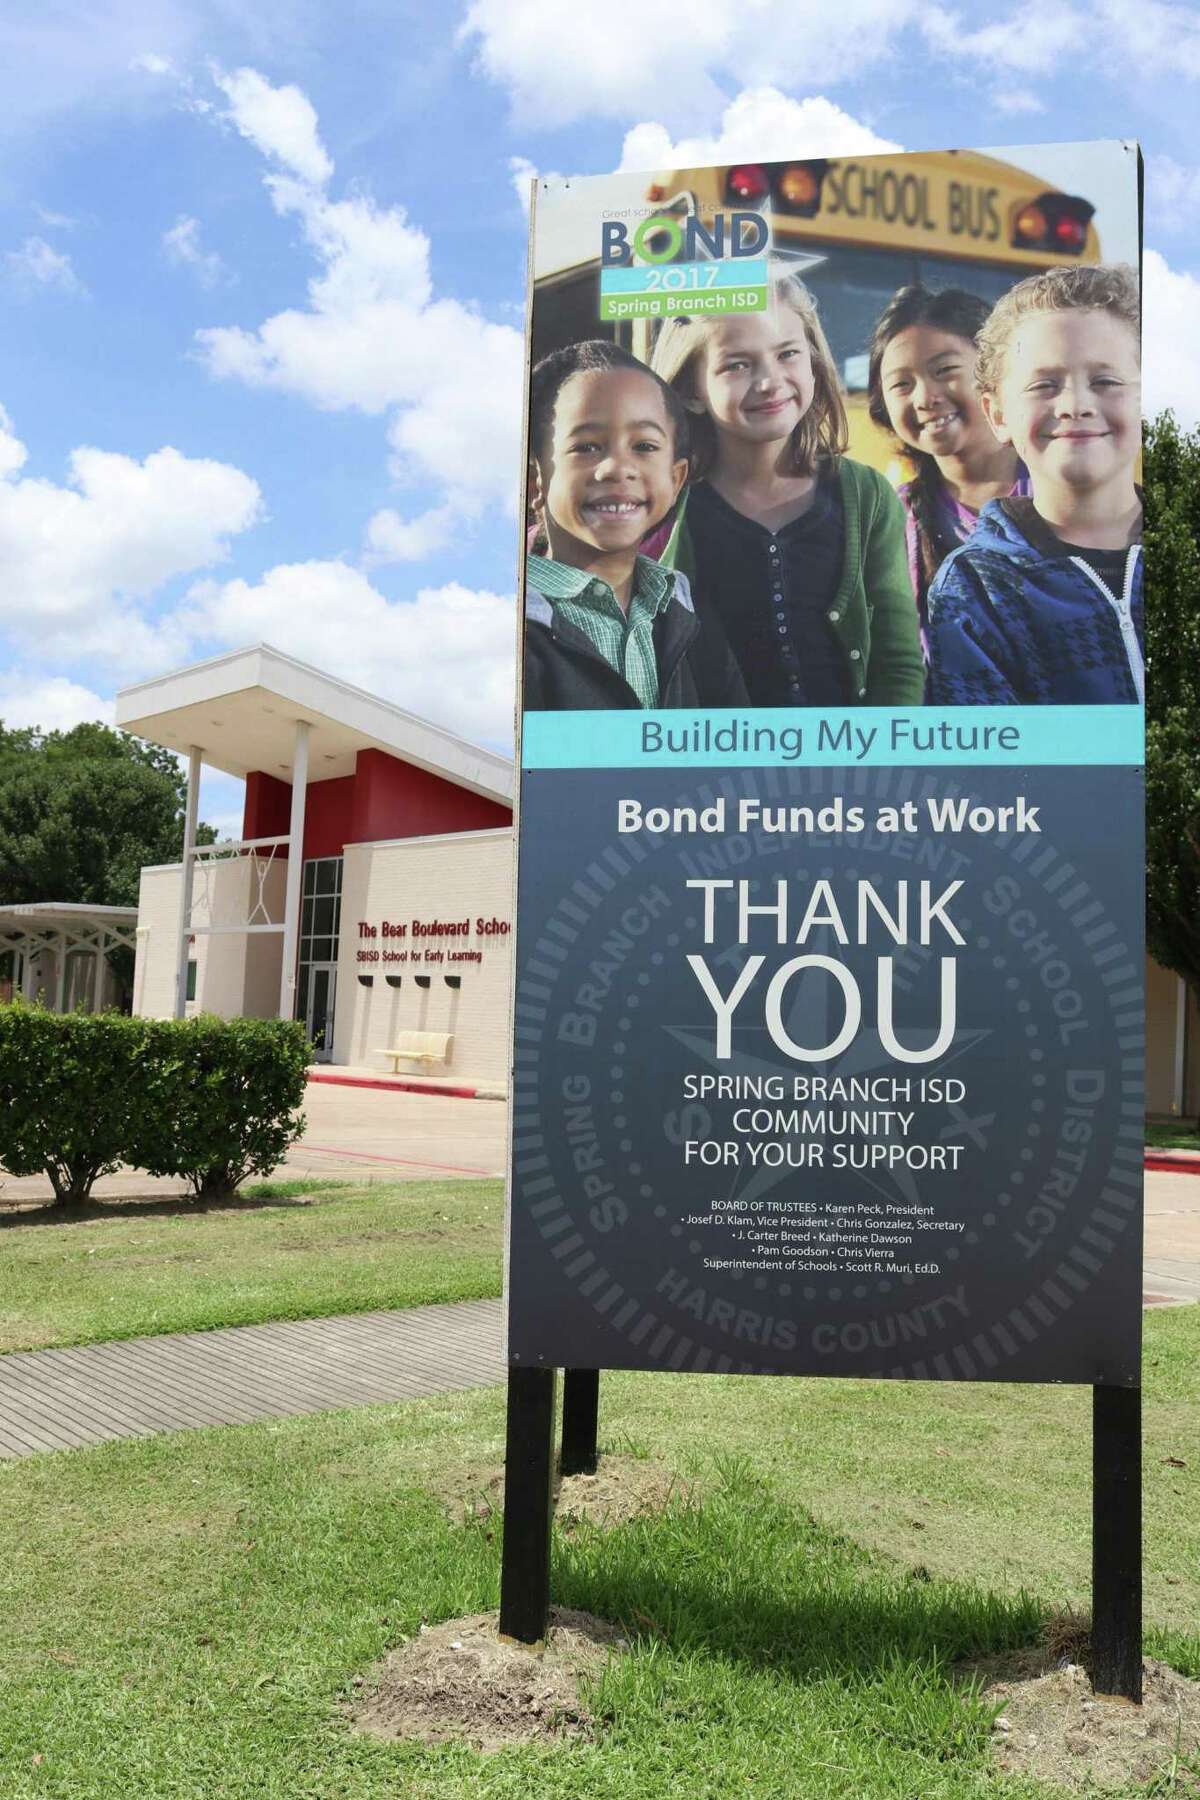 Chiller replacements and new courtyard lighting installed at The Bear Blvd. School were some of the first improvements funded by the Spring Branch ISD 2017 bond. The $898.4 million bond program includes the rebuilding of one middle and nine elementary schools and other projects through the 2027-28 school year.